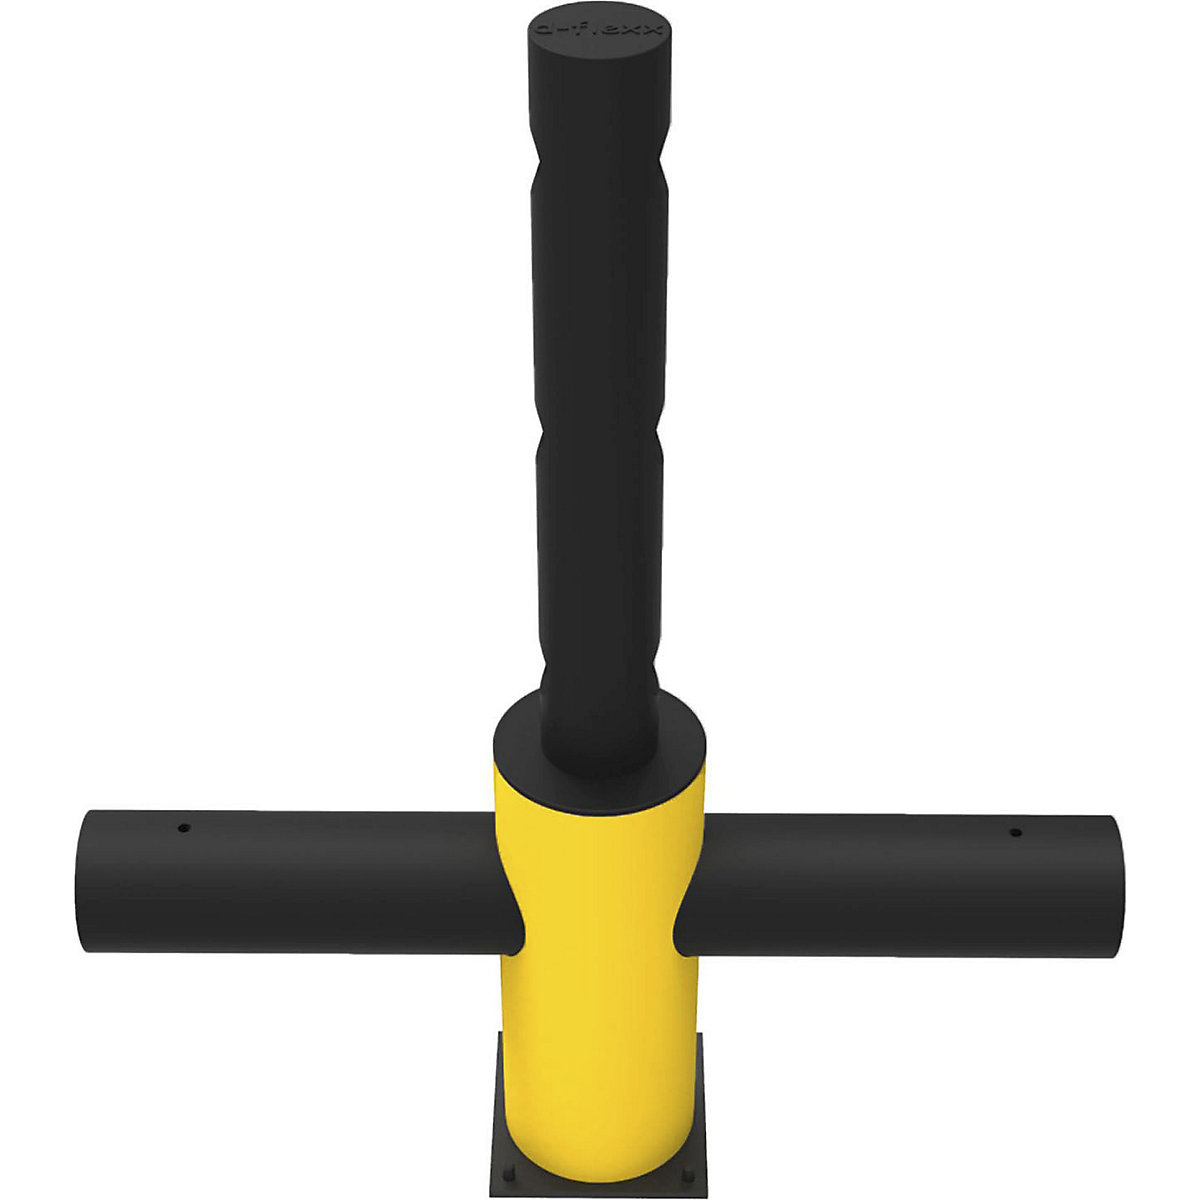 ECHO traffic barrier, made of flexible plastic, centre posts